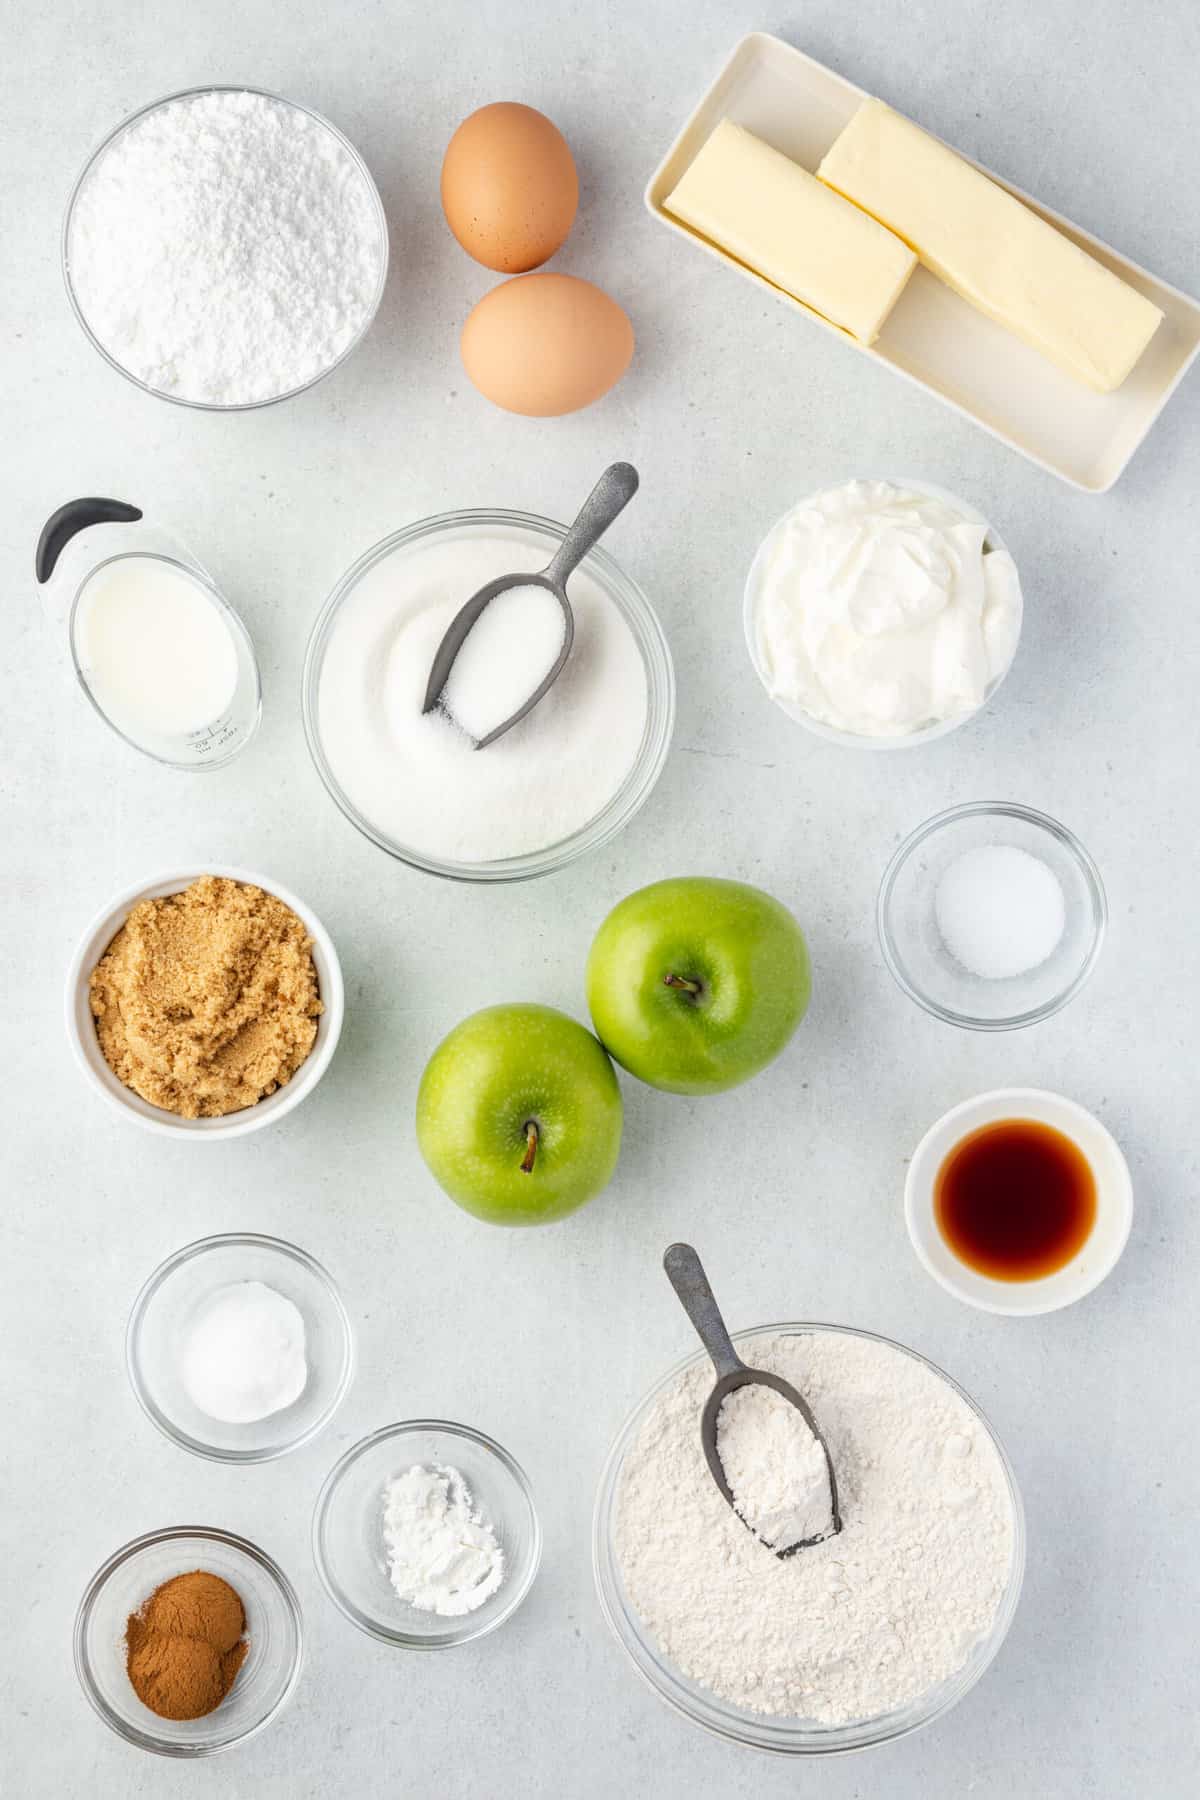 The ingredients for the muffins are placed on a white countertop. 